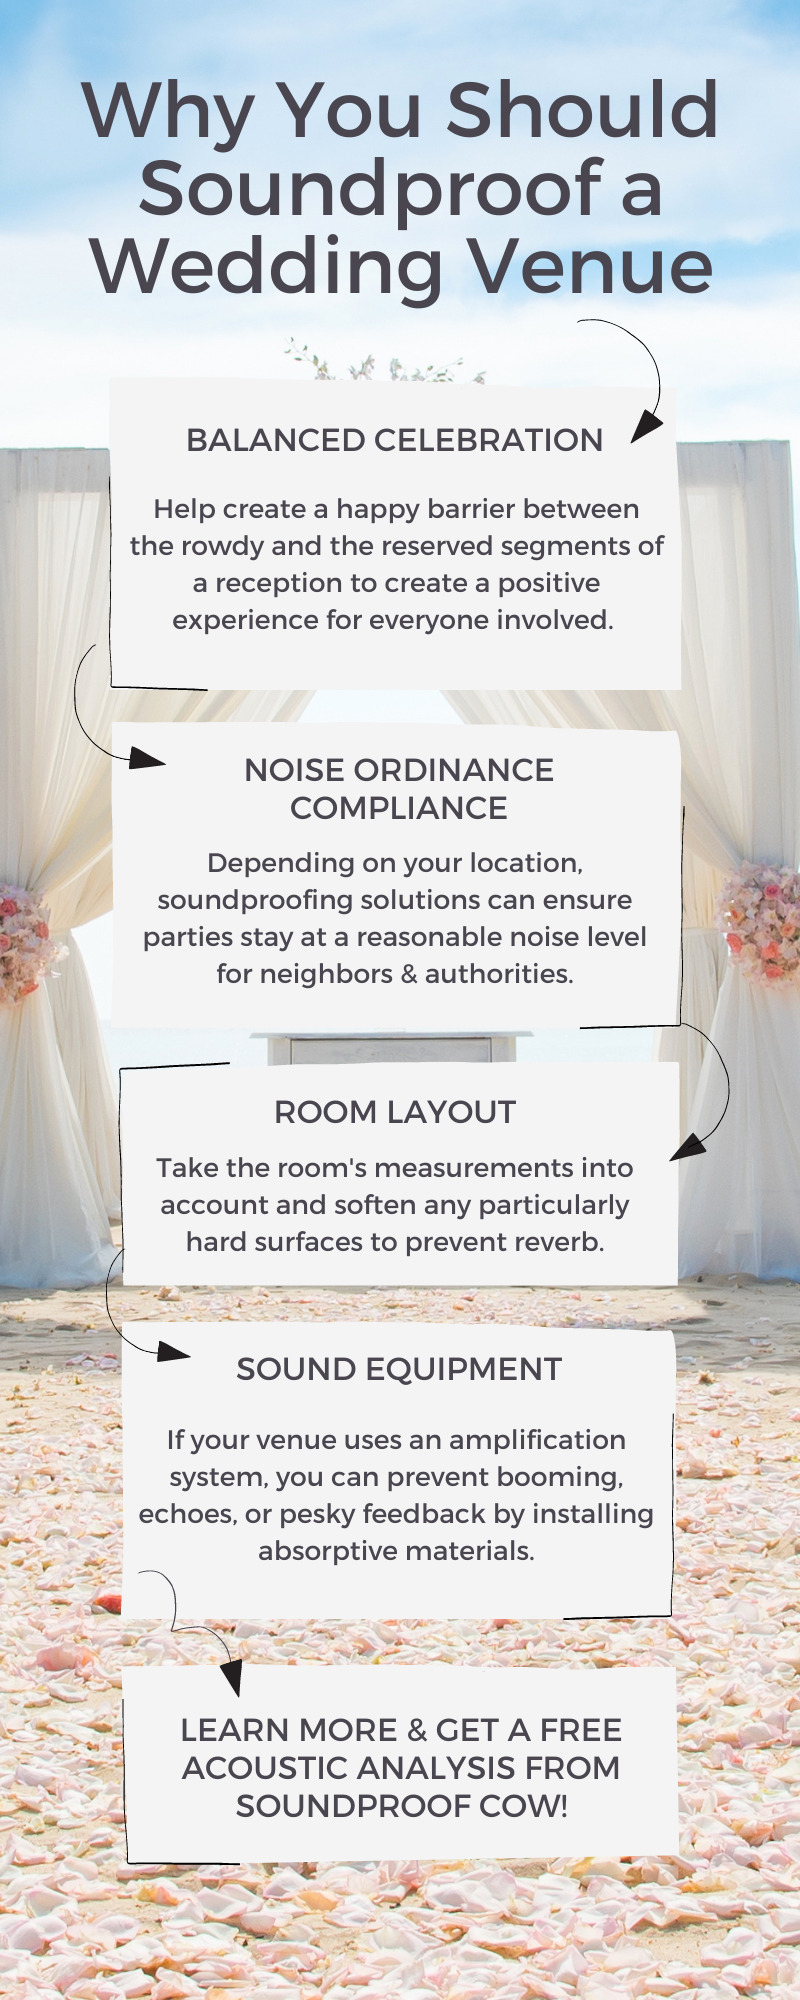 Why you should soundproof a wedding venue